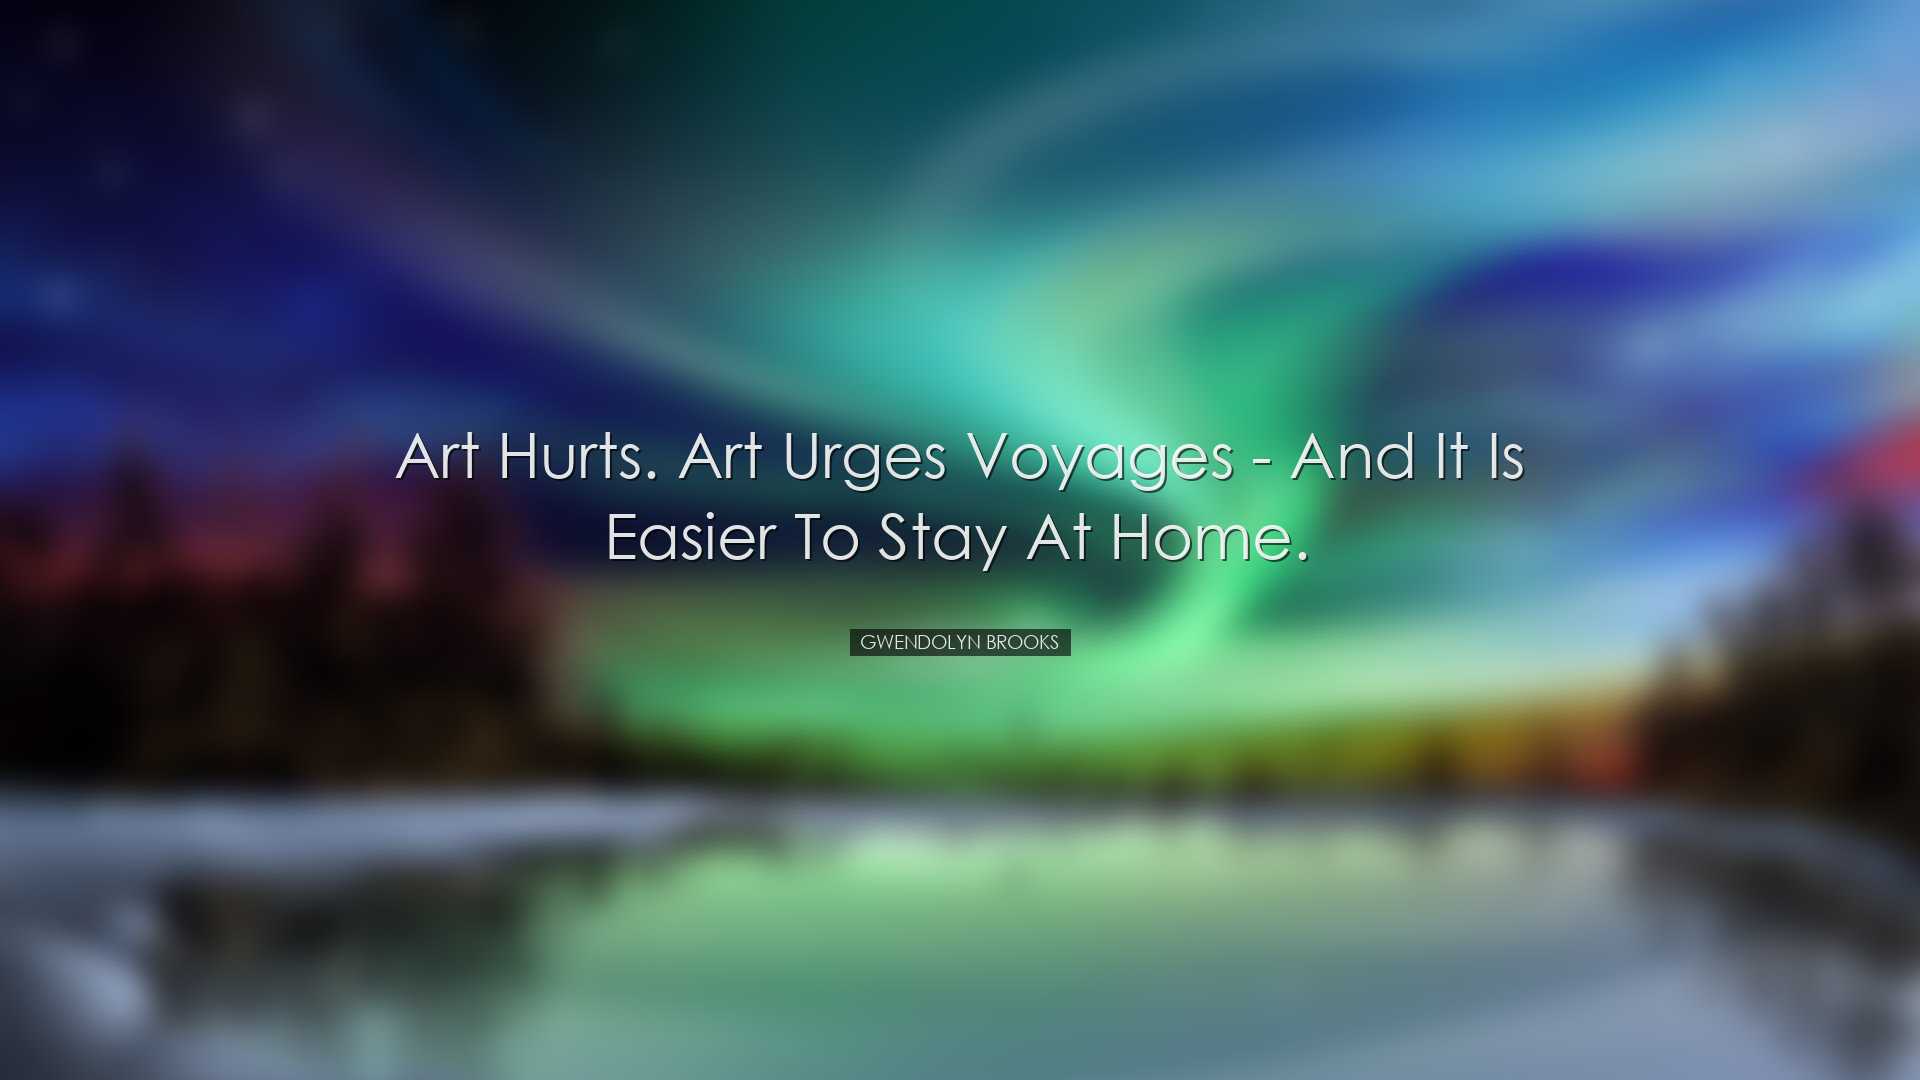 Art hurts. Art urges voyages - and it is easier to stay at home. -